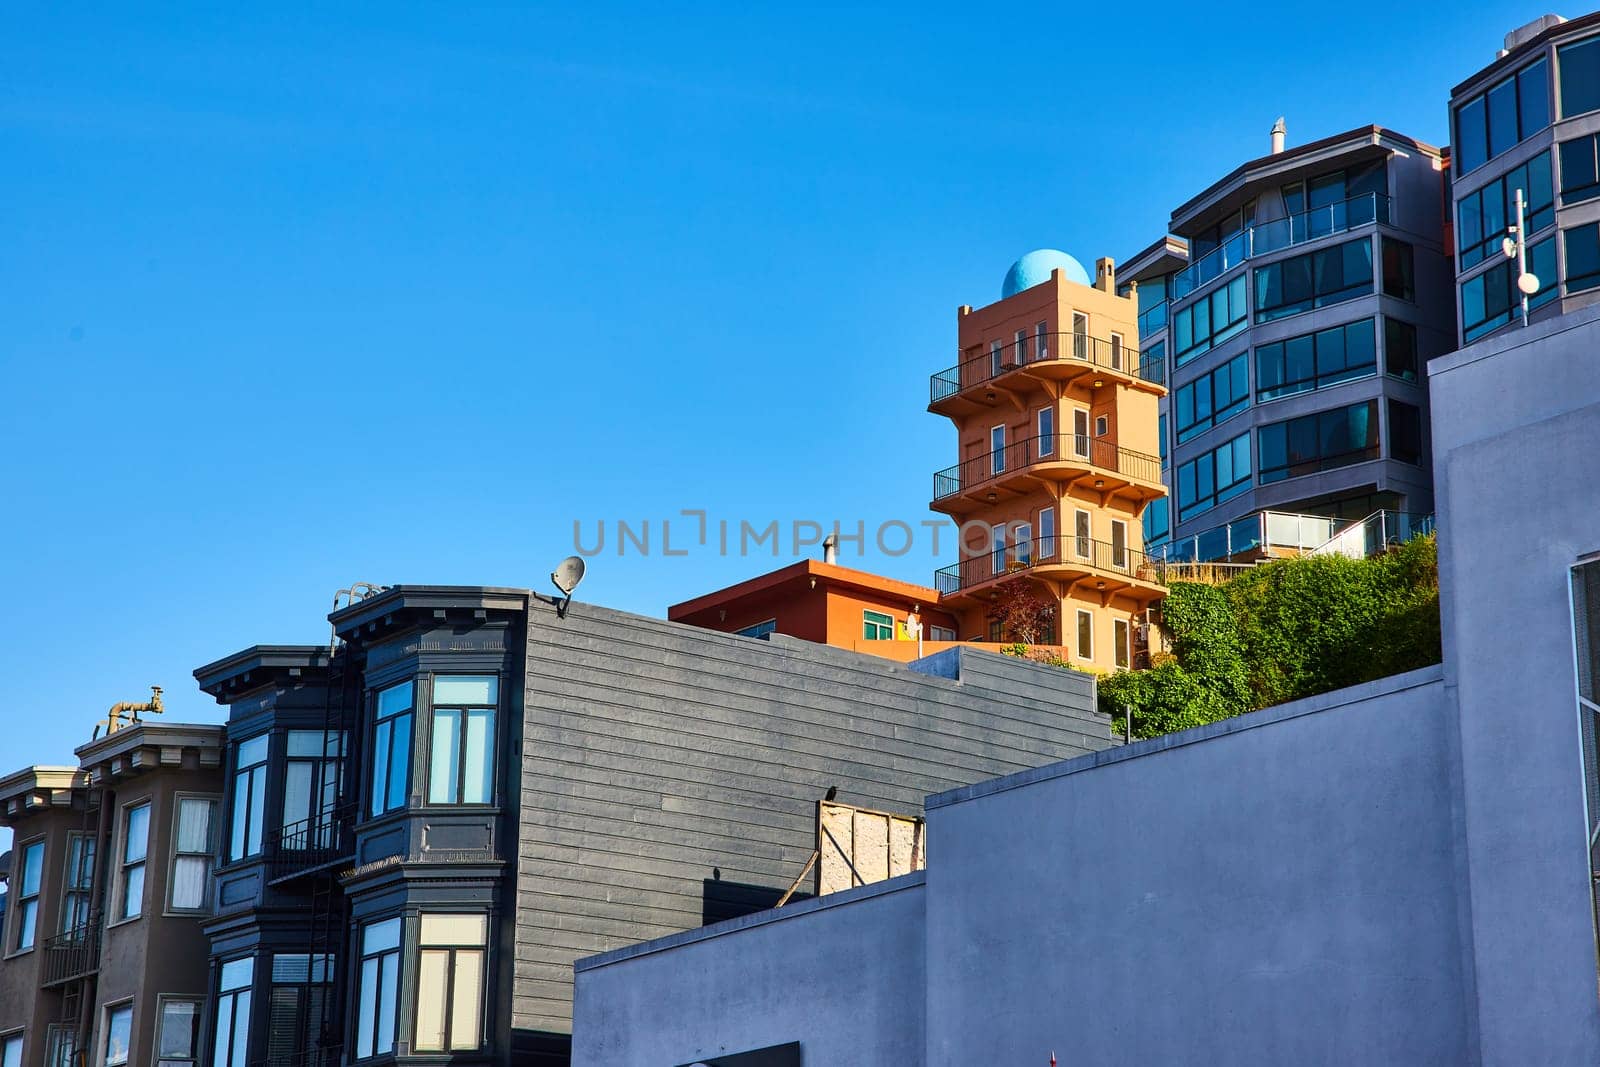 Image of Black apartment building with unique yellow tower structure on hillside behind it